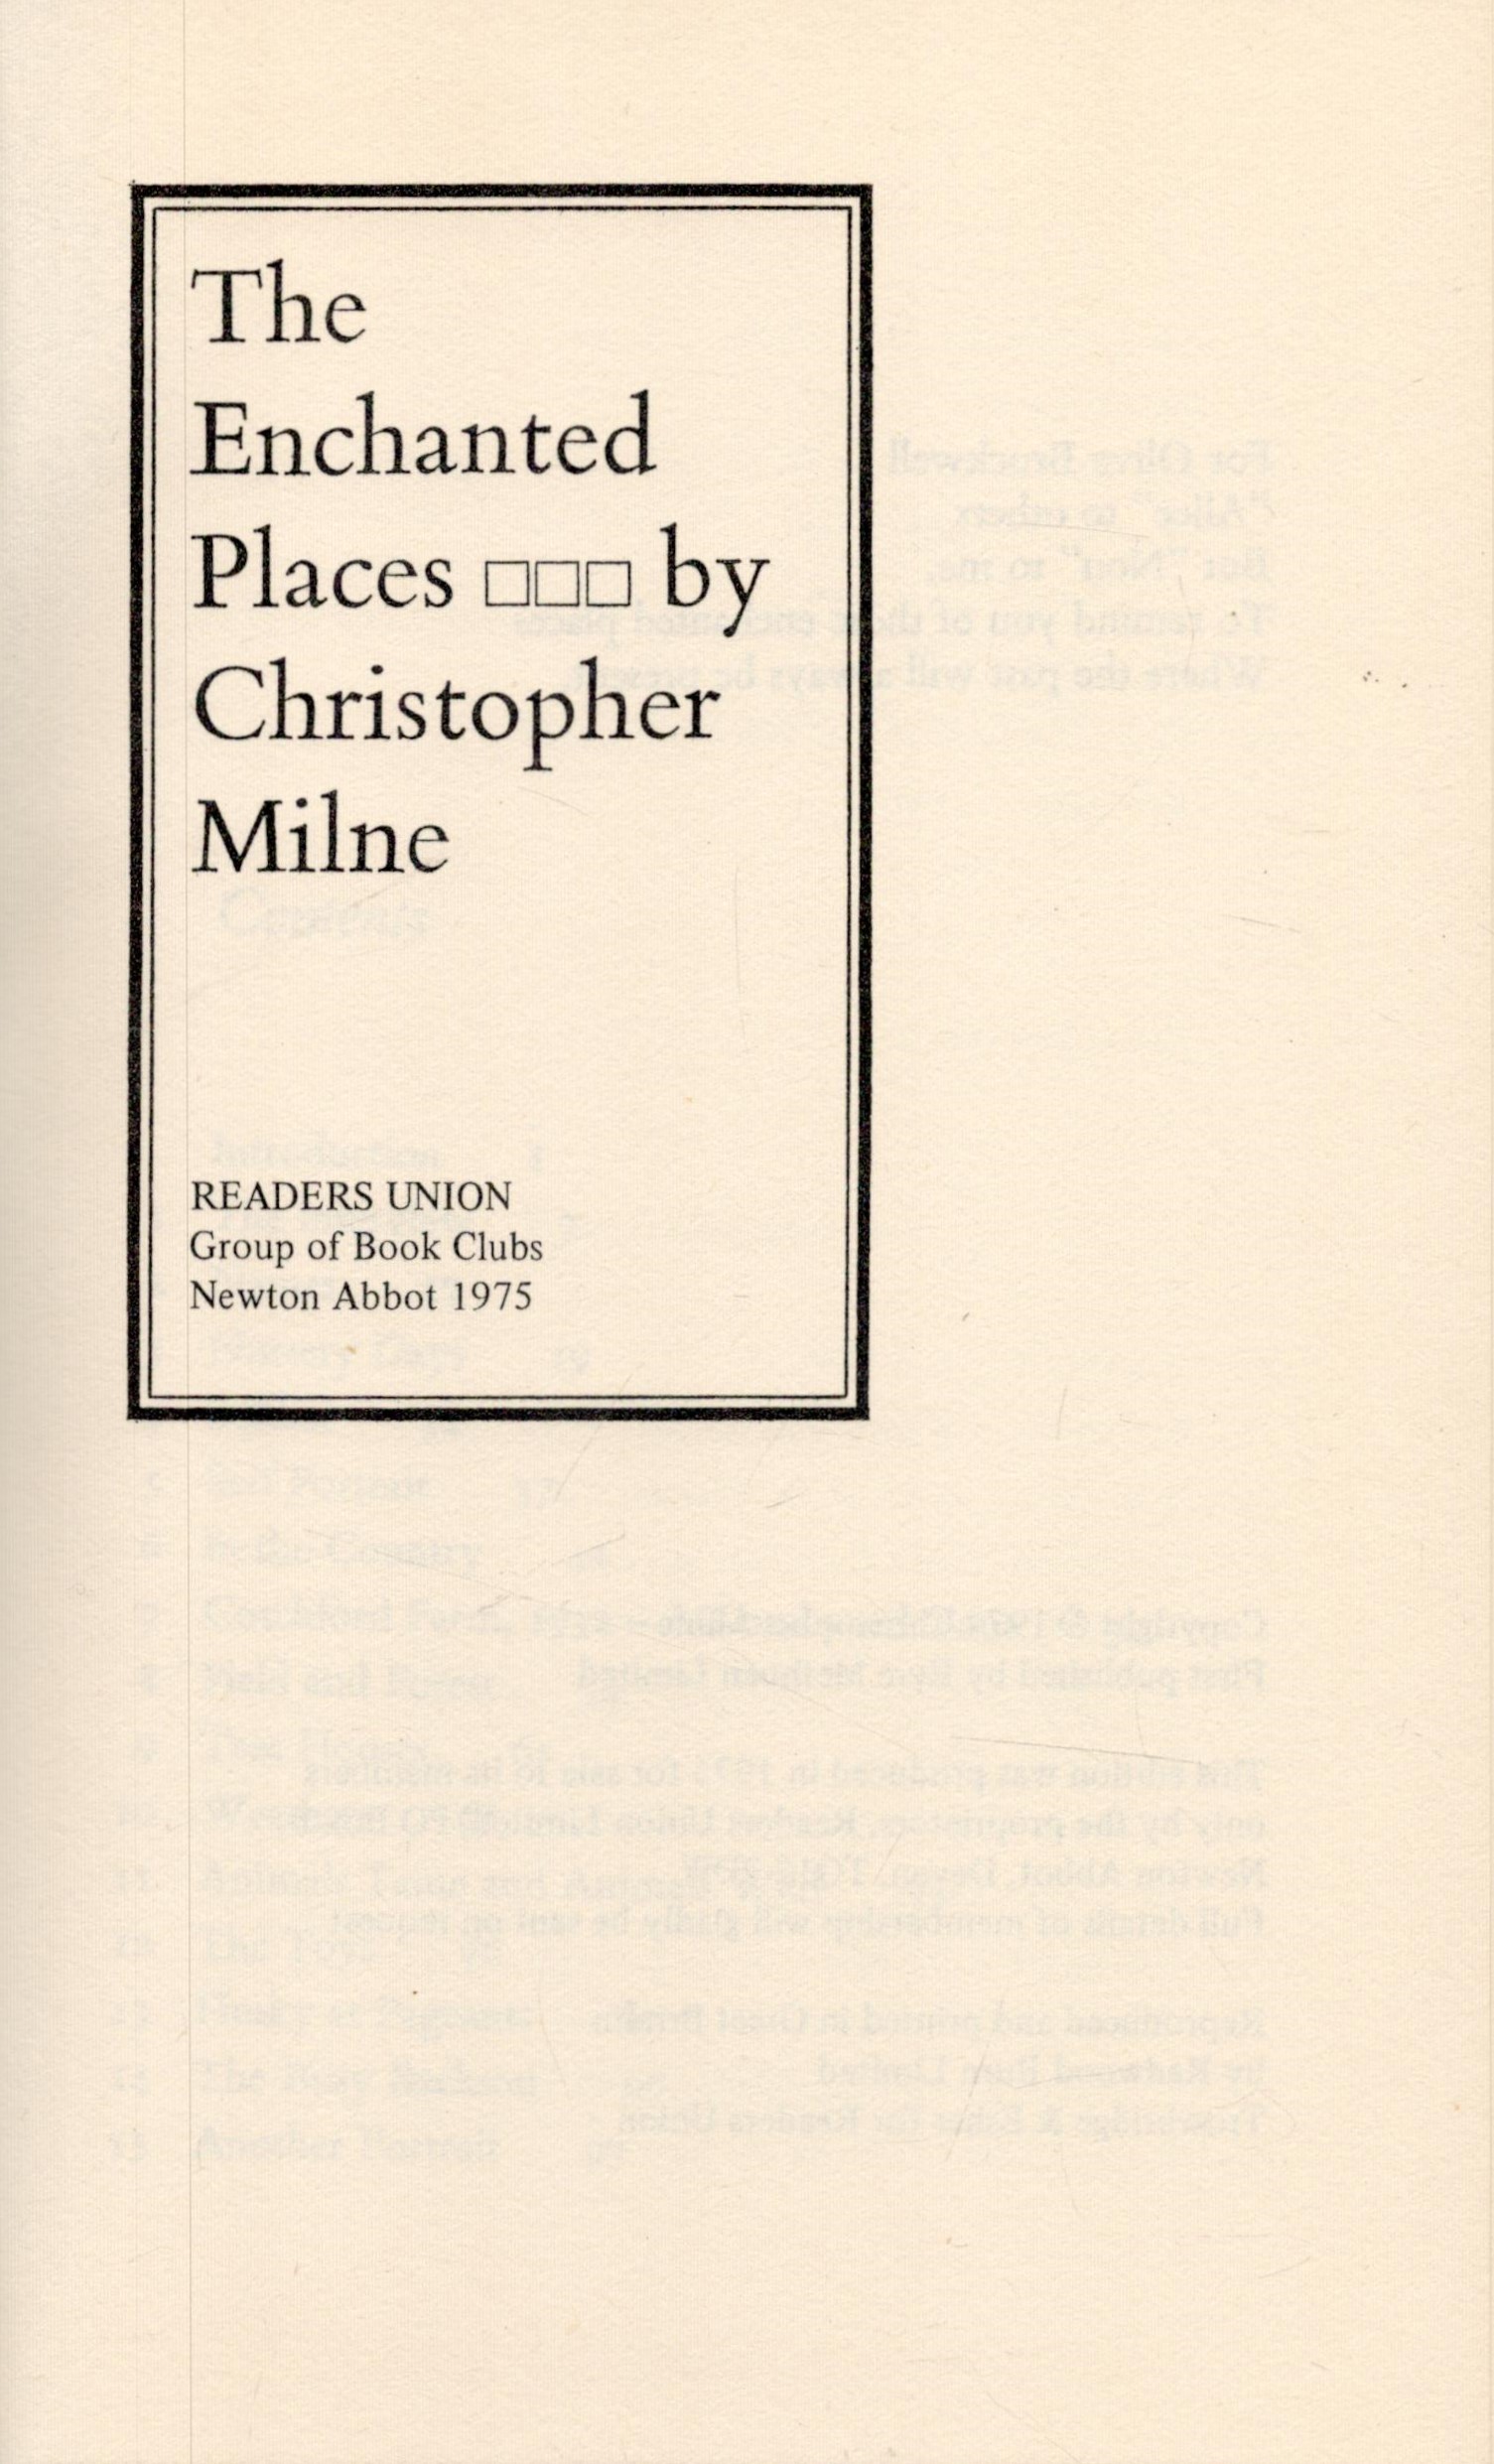 The Enchanted Places by Christopher Milne 1975 Readers Union Edition Hardback Book with 169 pages - Image 2 of 3